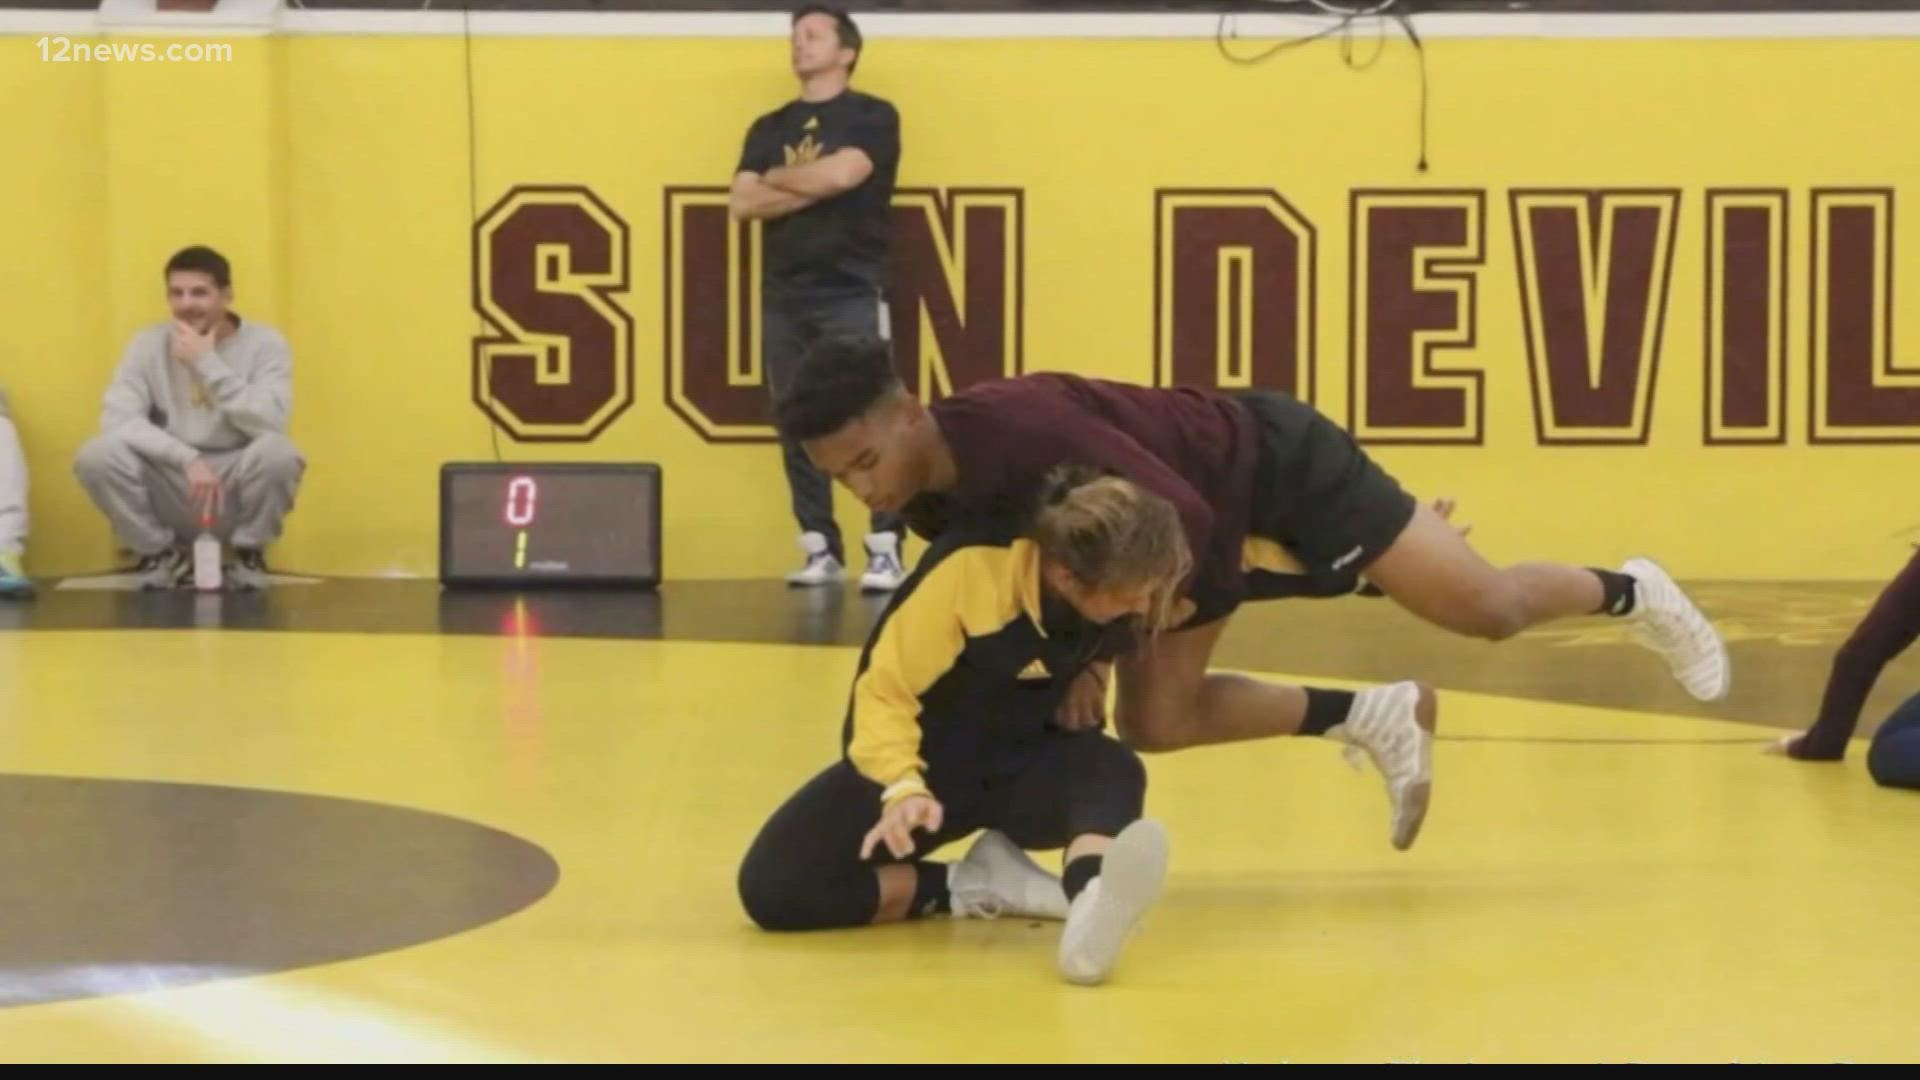 A wrestler at ASU is gaining national attention for her courage and tenacity. Marlee Smith is breaking down barriers and opening doors for other women in the sport.